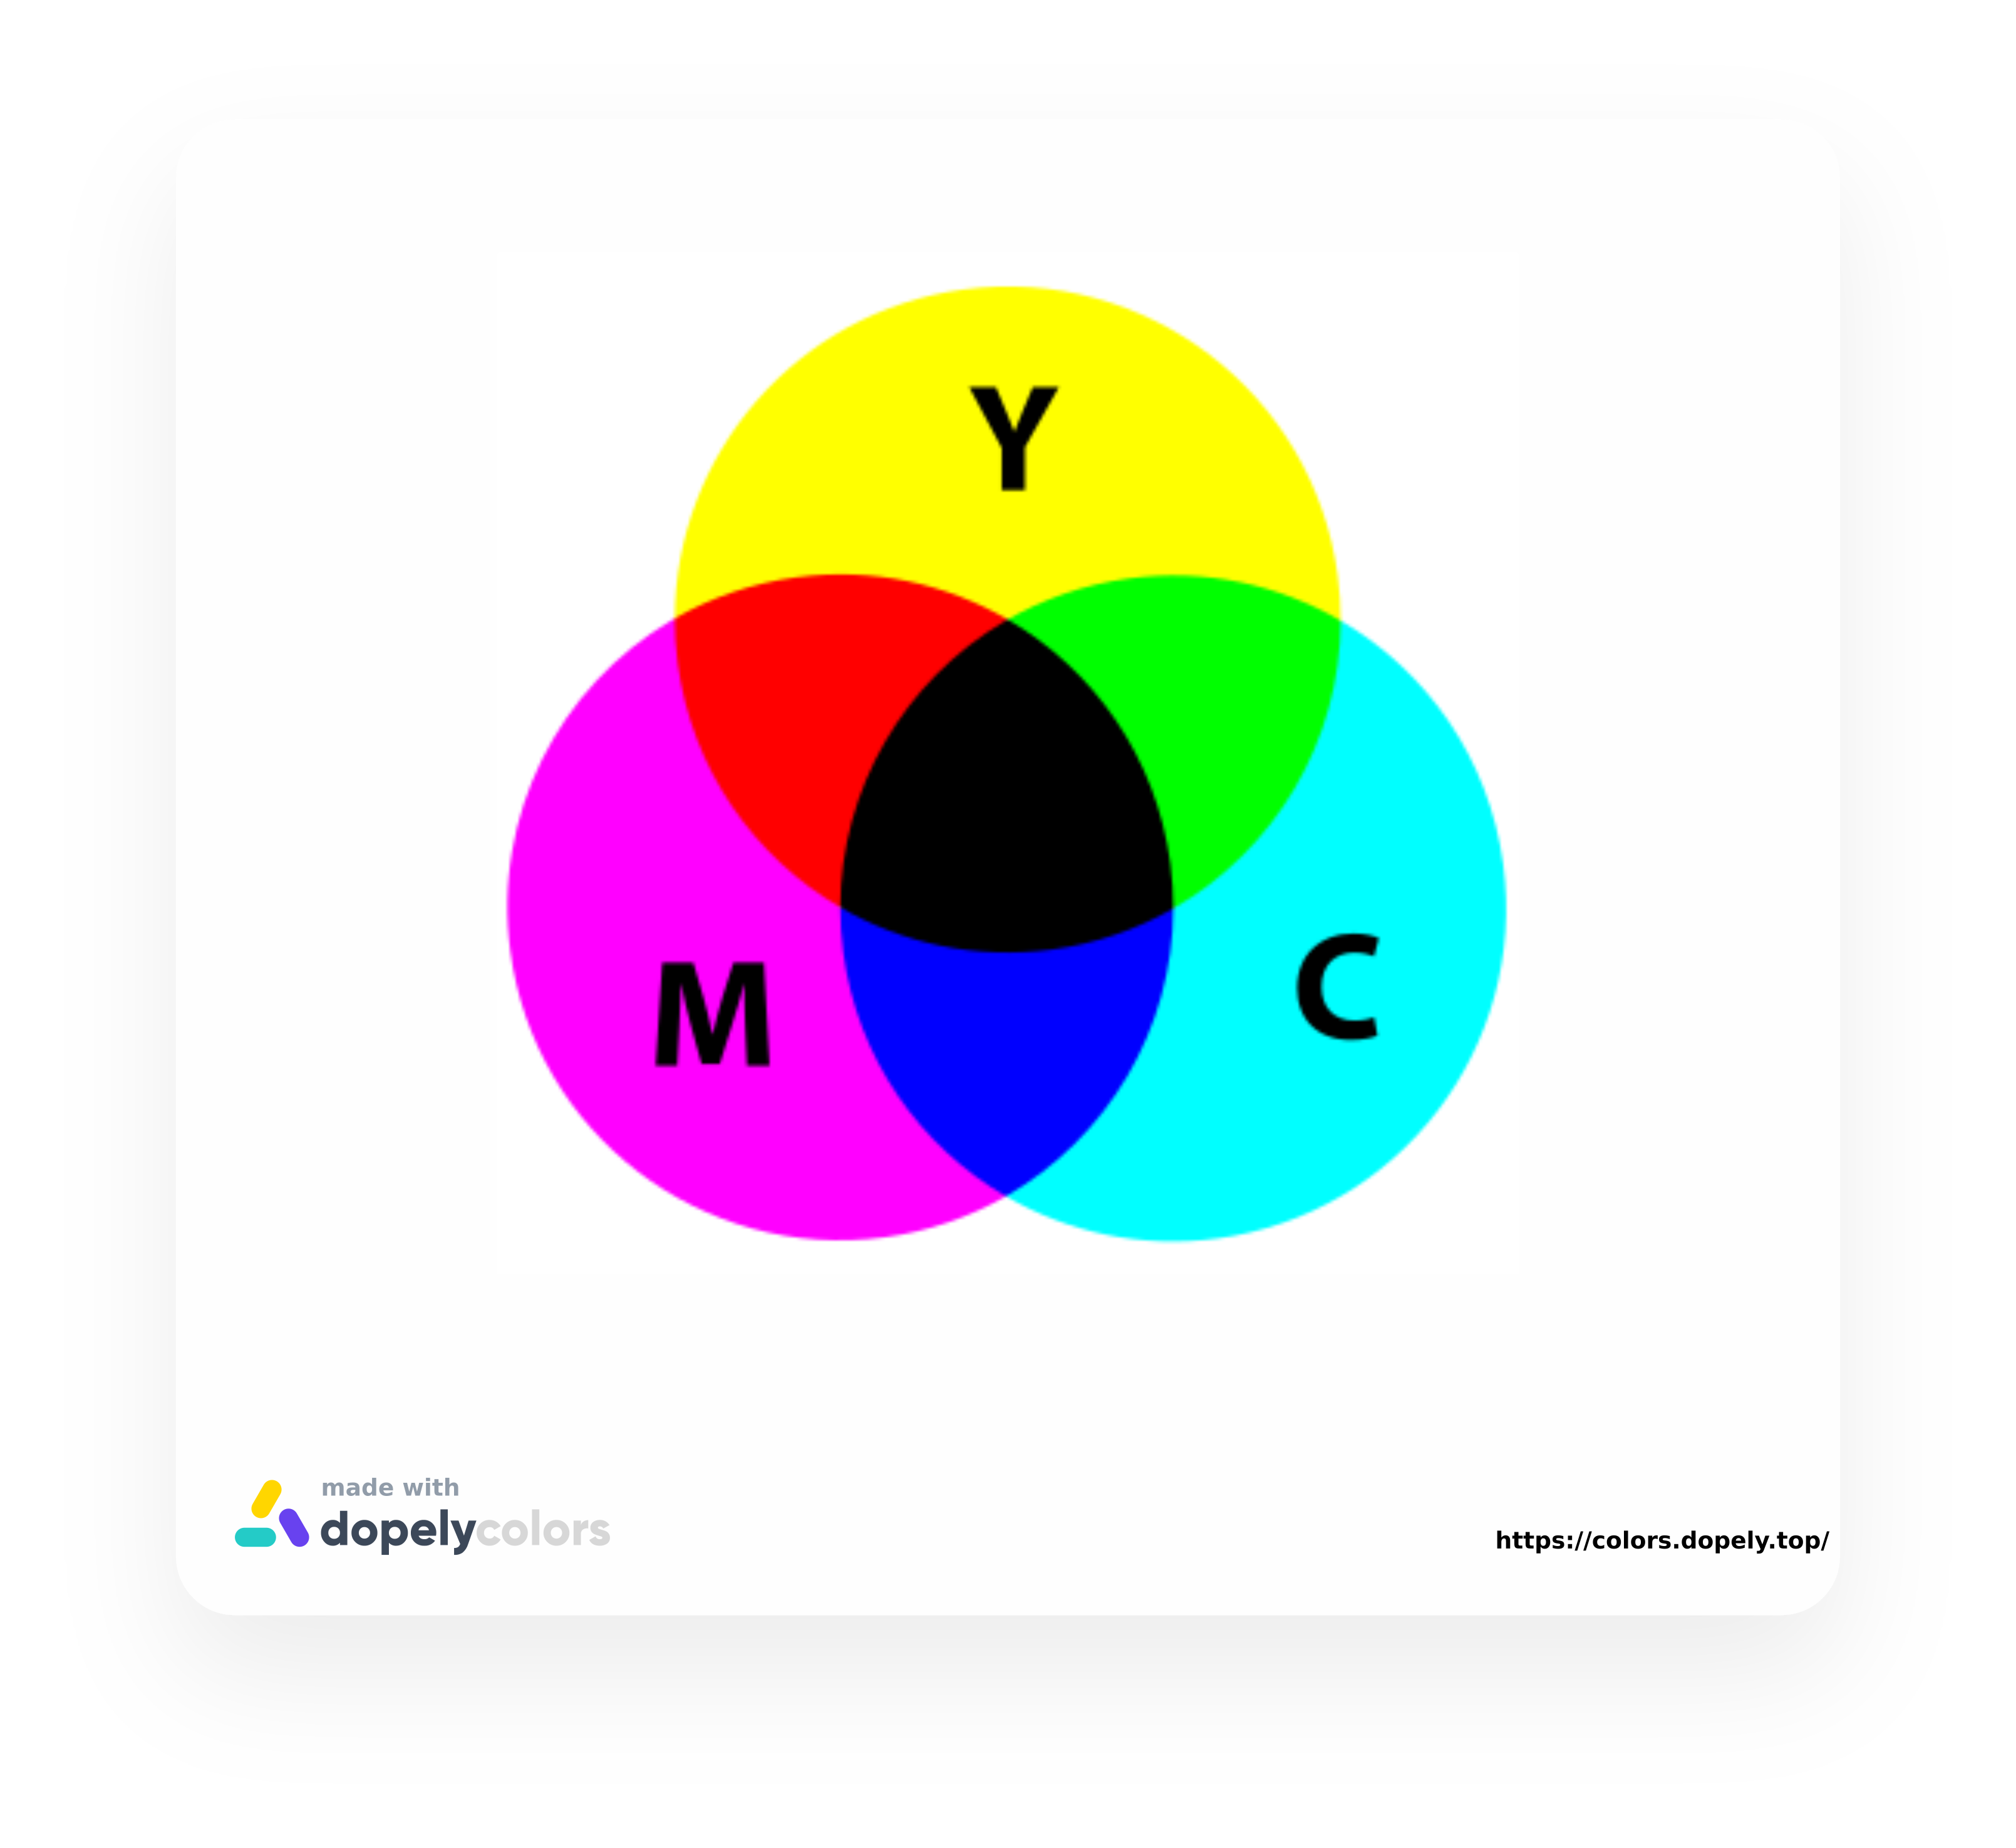 The subtractive color (CMYK) mixing guide as in printing inks